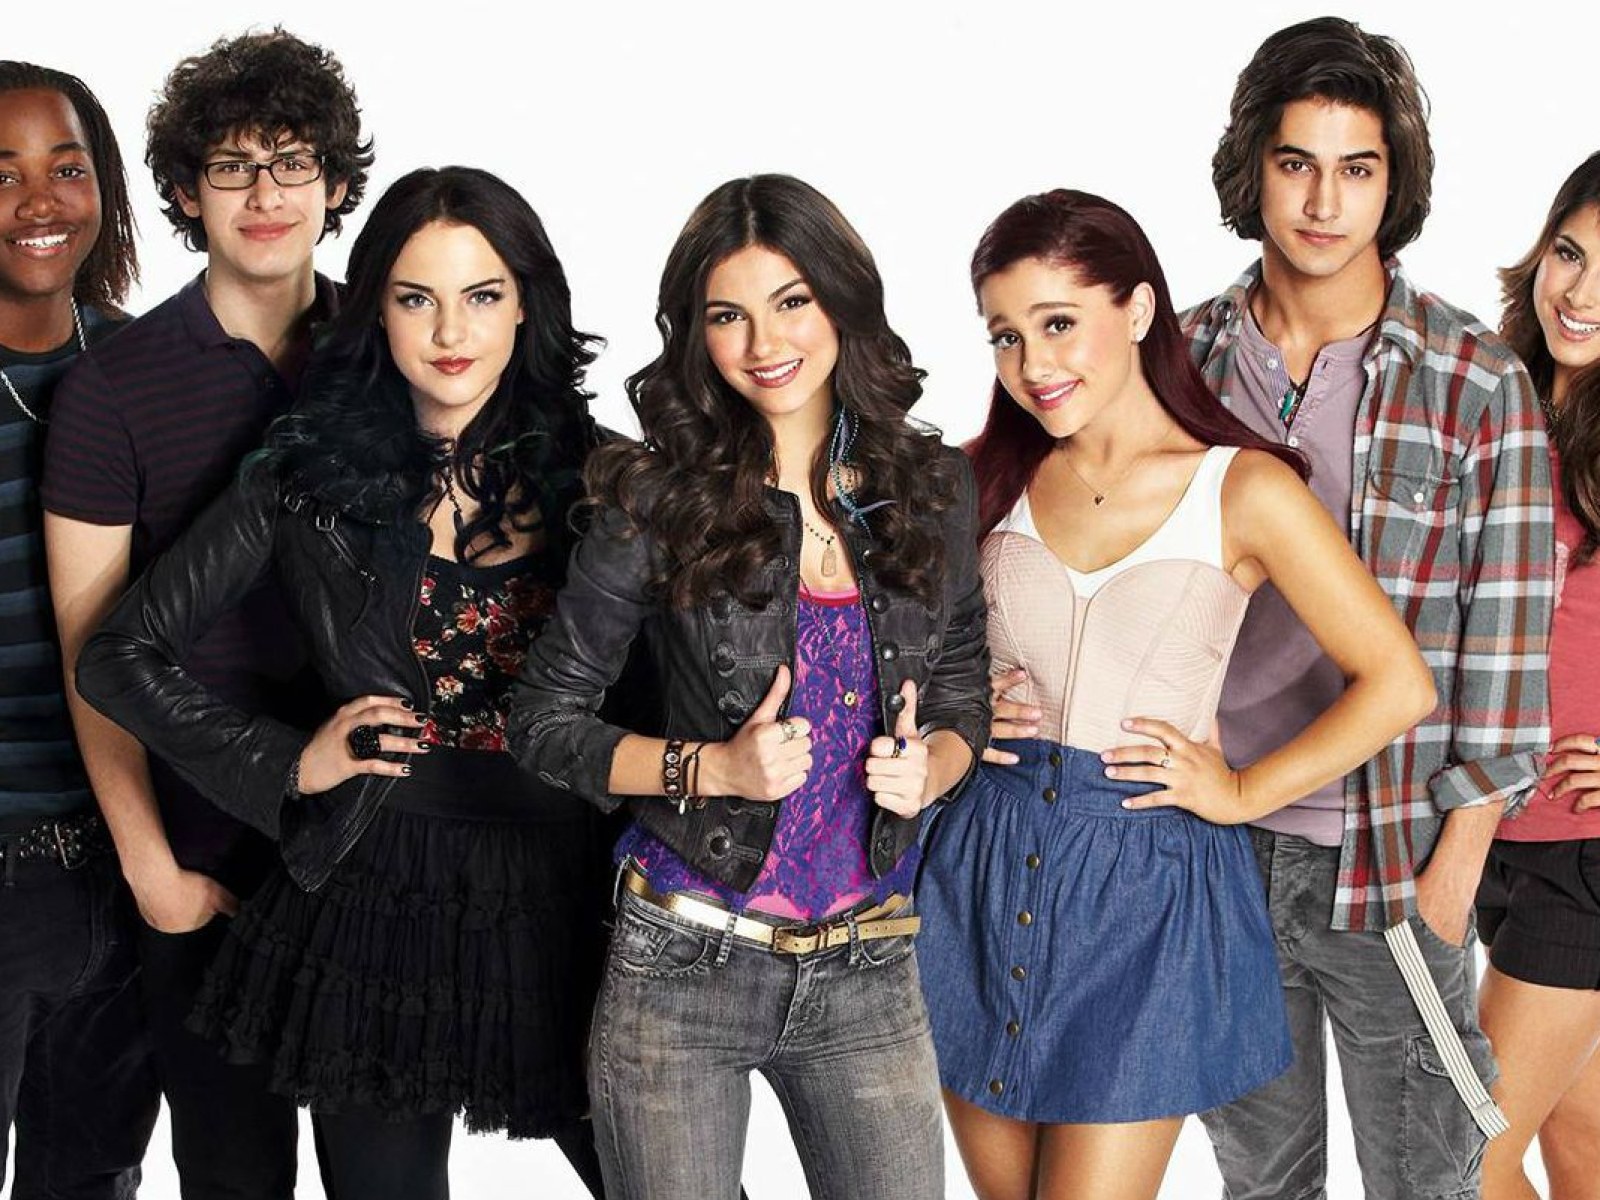 The Cast of 'Victorious': Where Are They Now?